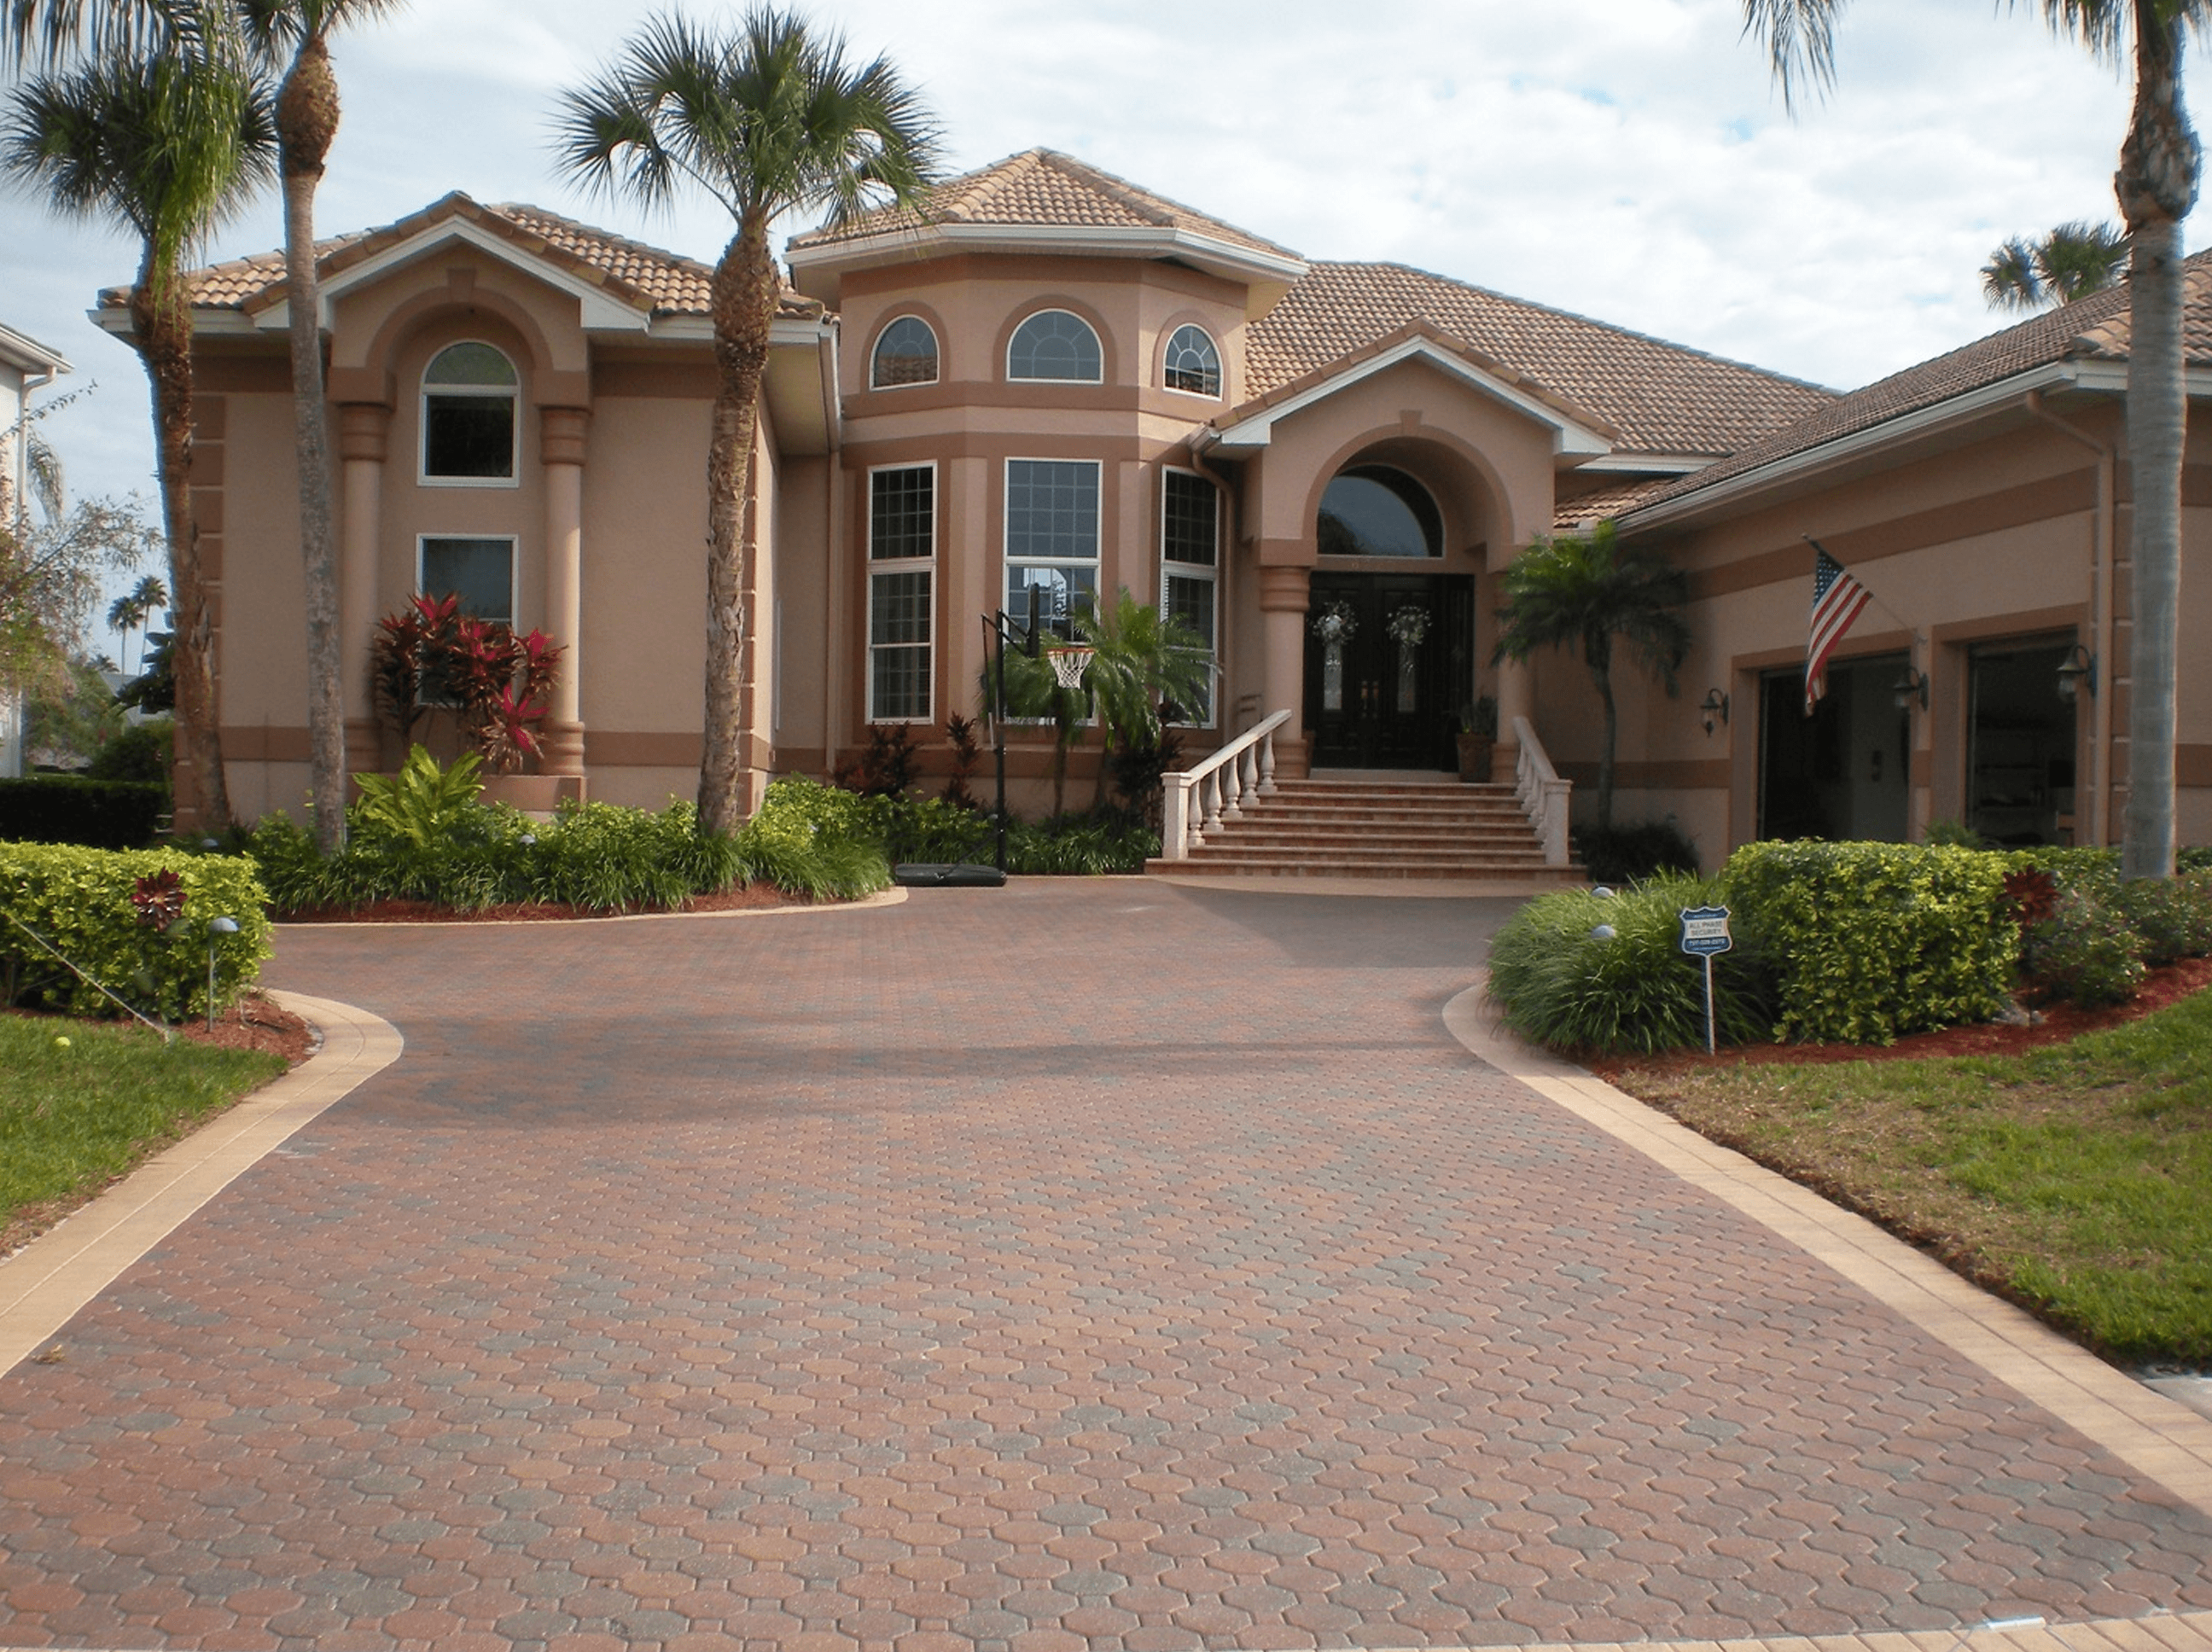 driveway surfaces